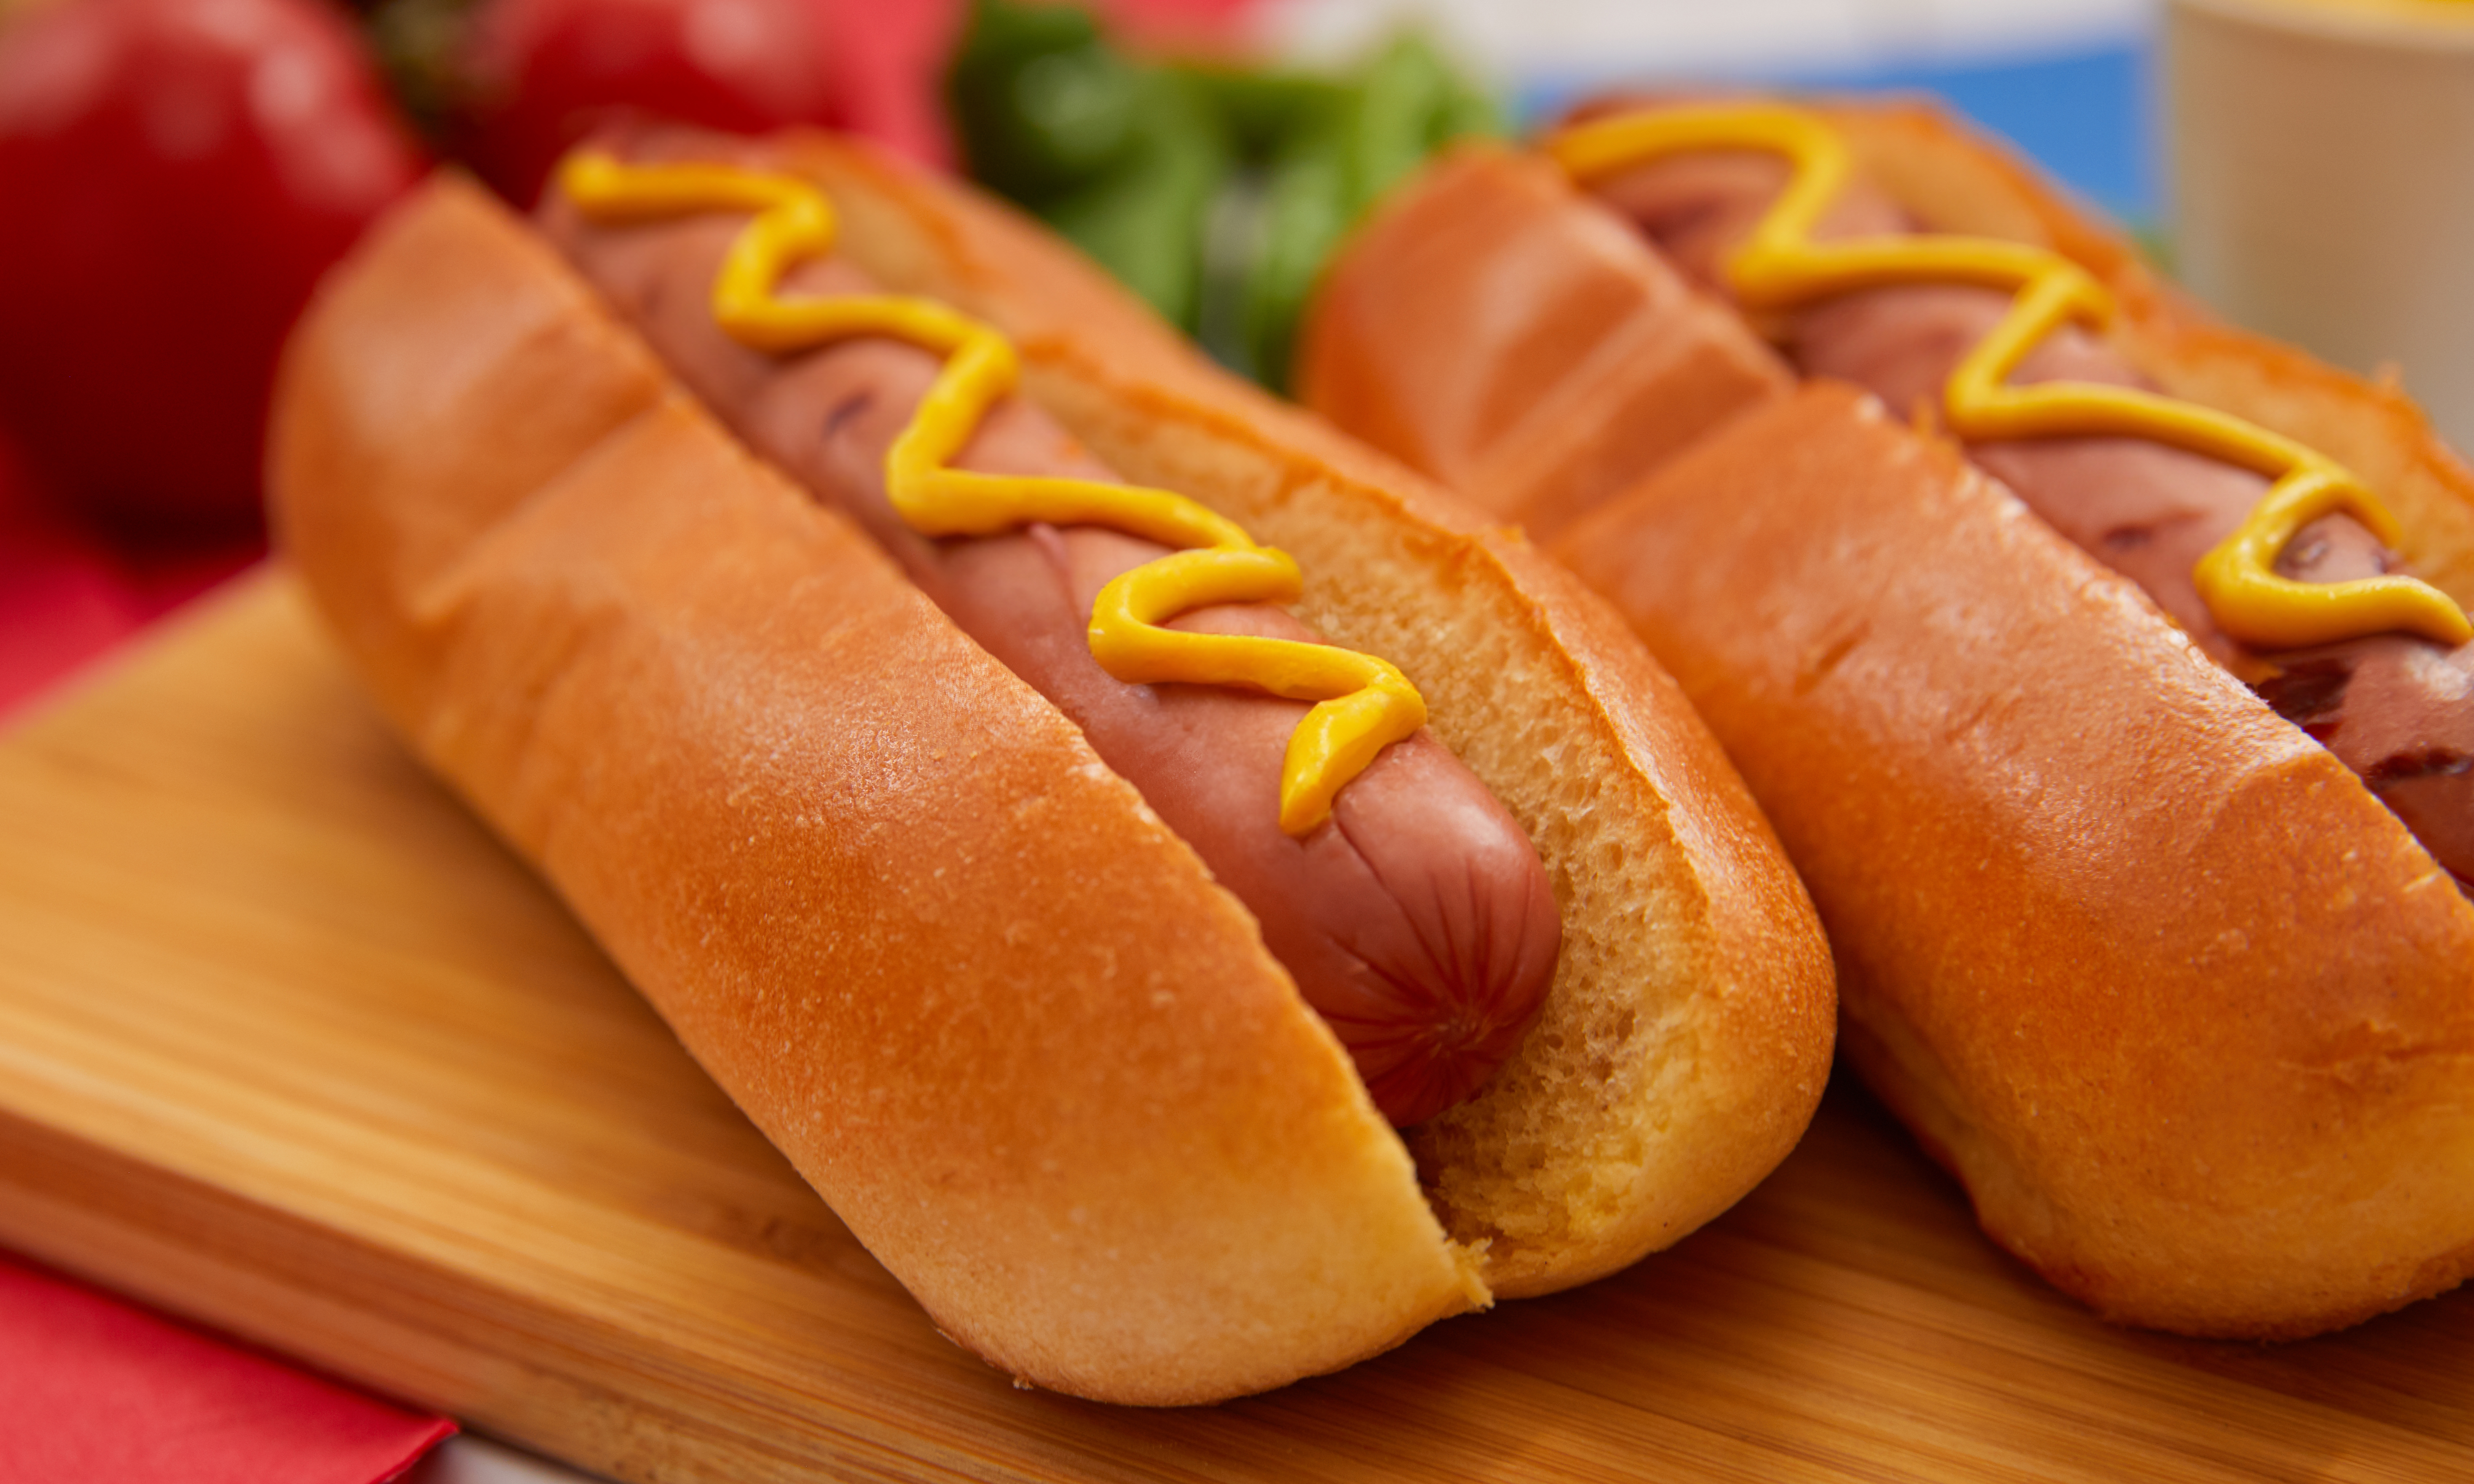 11 National Hot Dog Day deals that are frankly delicious